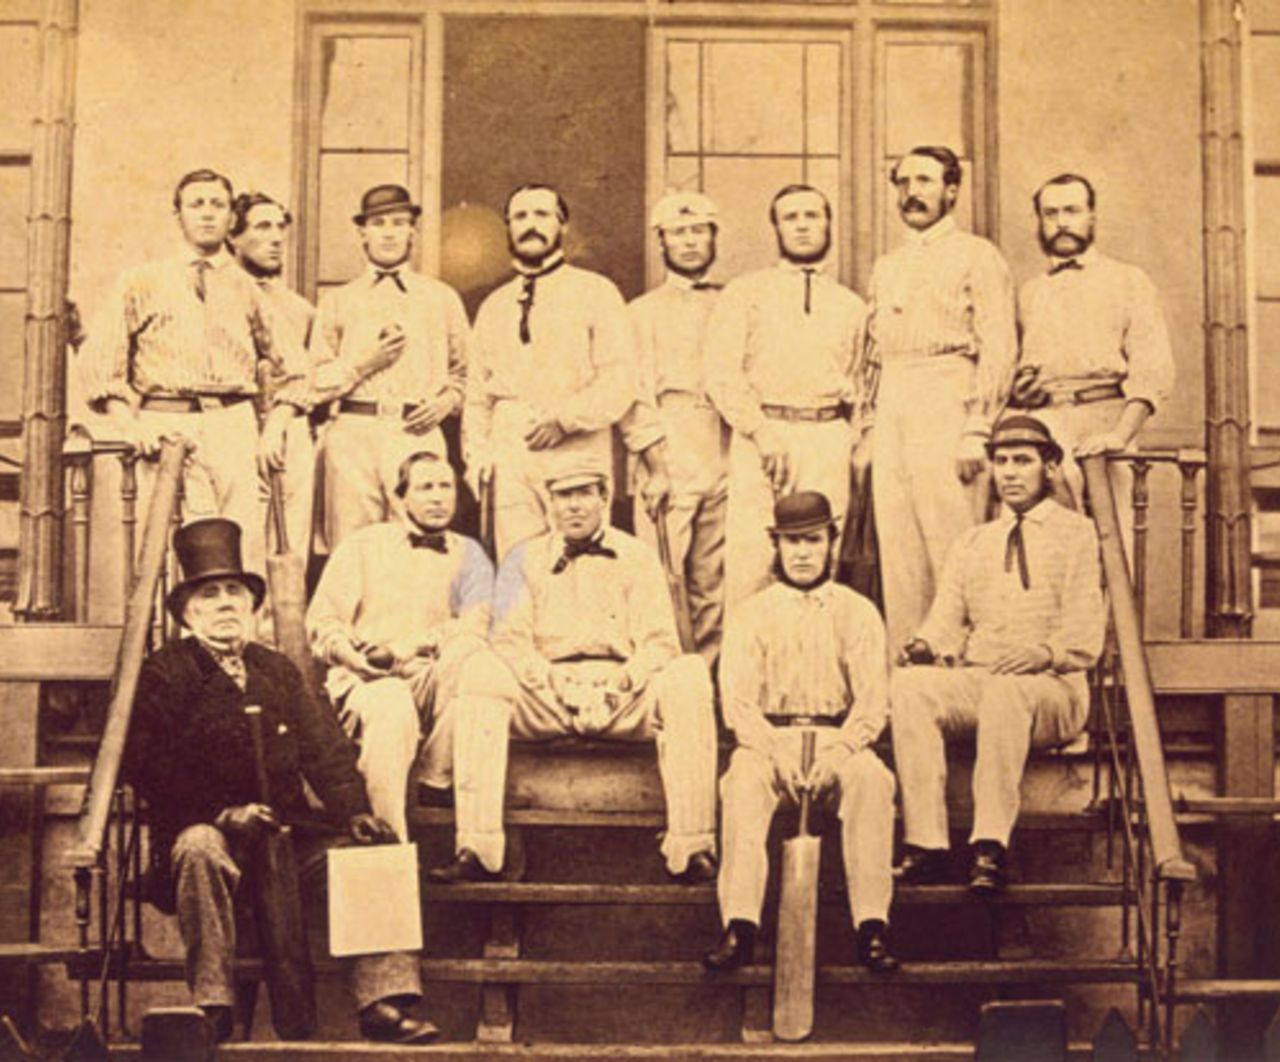 The England cricket team assembled at Lord's in London before leaving for the 1863 tour of Australia. Julius Caesar, Alfred Clarke, George Tarrant, George Parr, E M Grace, Robert Carpenter, George Anderson, William Caffyn; (bottom row) Robert C Tinley, Thomas Lockyer, Thomas Hayward, John Jackson, October 1, 1863